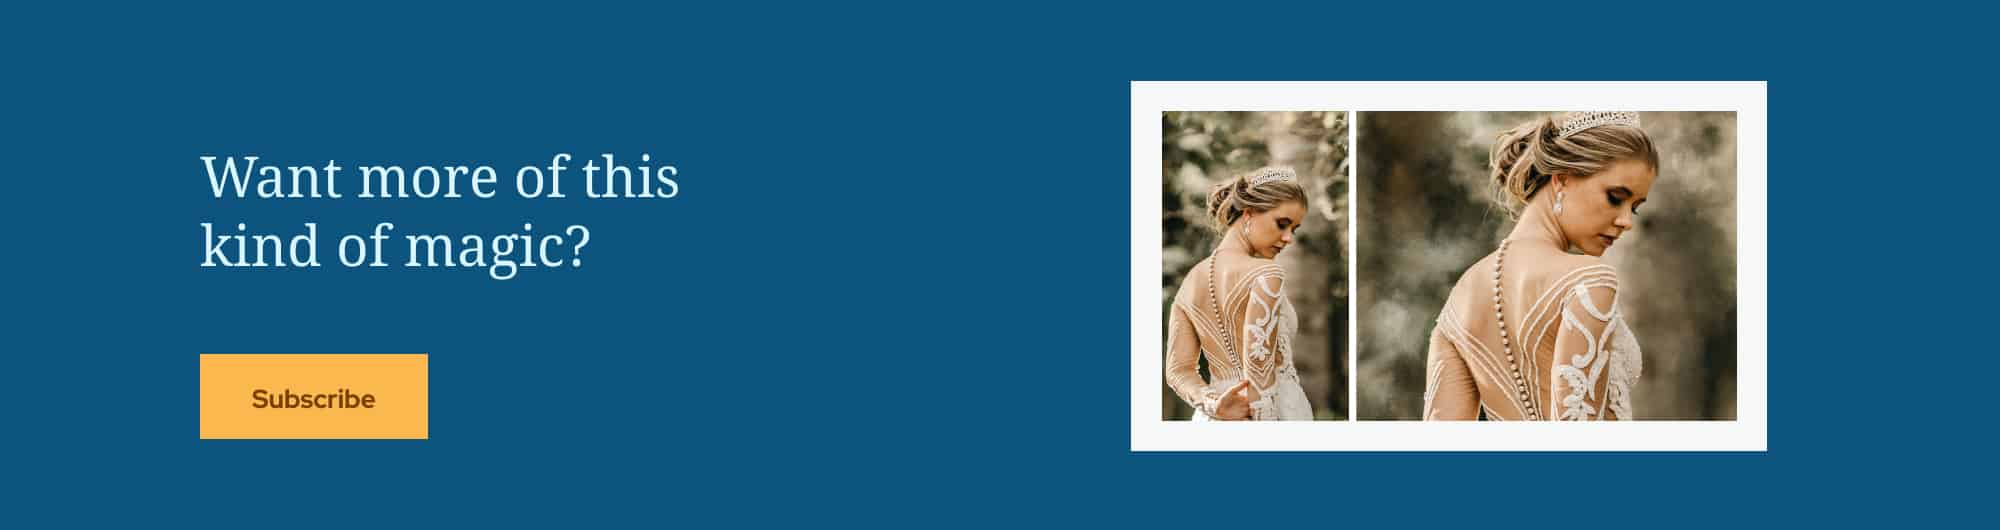 A blue box displays a portrait of a bride along side the words "Want more of this kind of magic?" A yellow button below this question encloses the word "Subscribe." Click this button to get ShootProof's newsletter in your inbox!